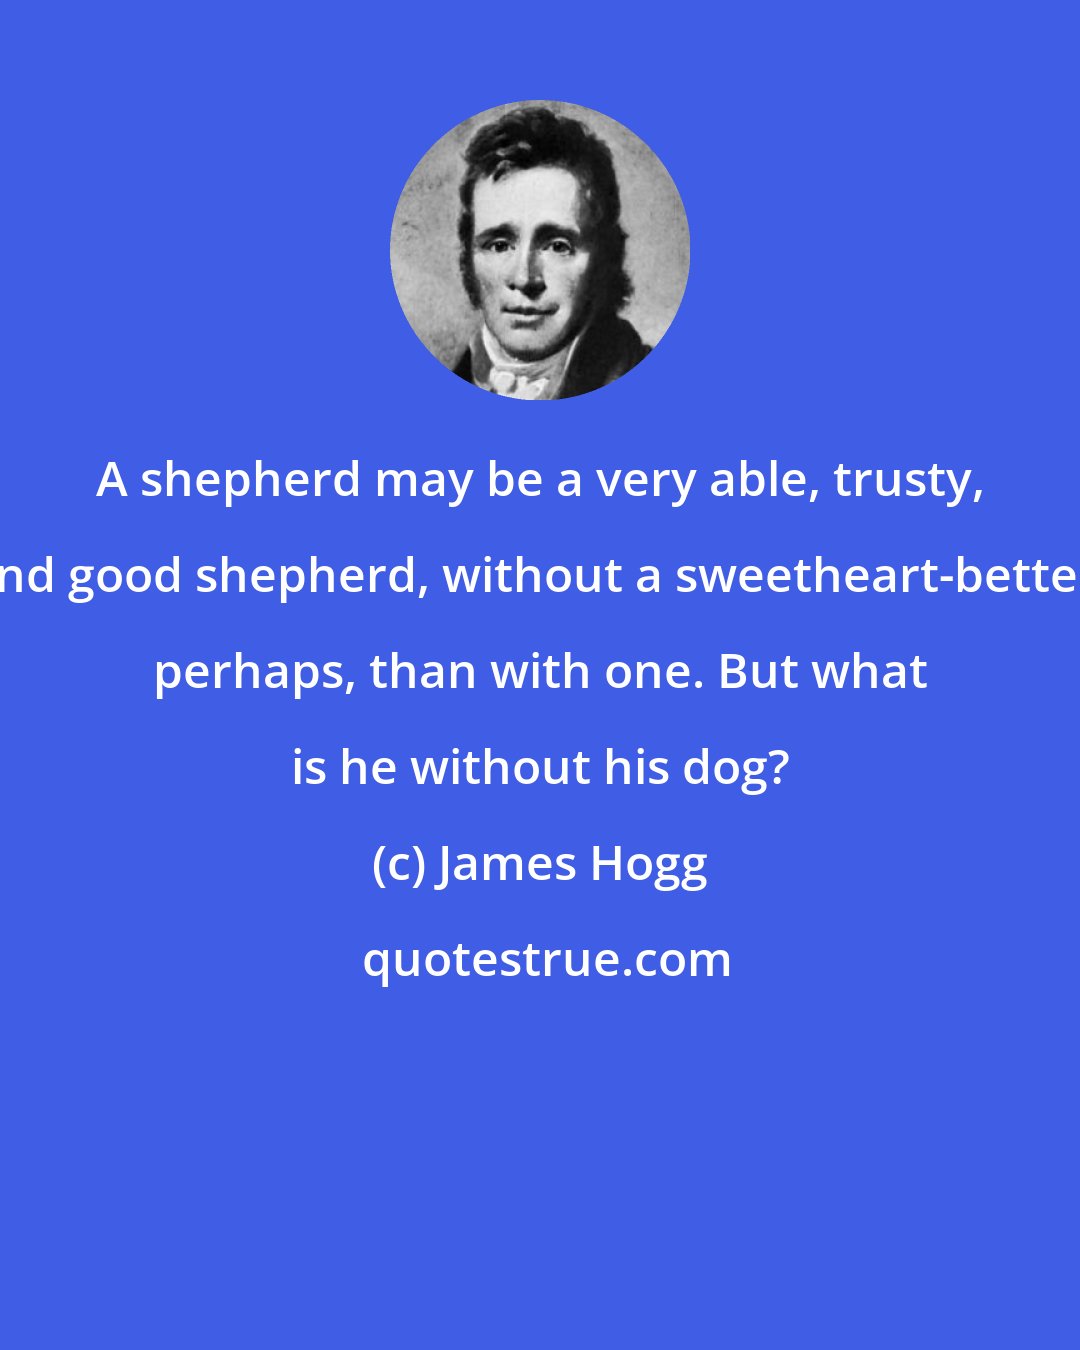 James Hogg: A shepherd may be a very able, trusty, and good shepherd, without a sweetheart-better, perhaps, than with one. But what is he without his dog?